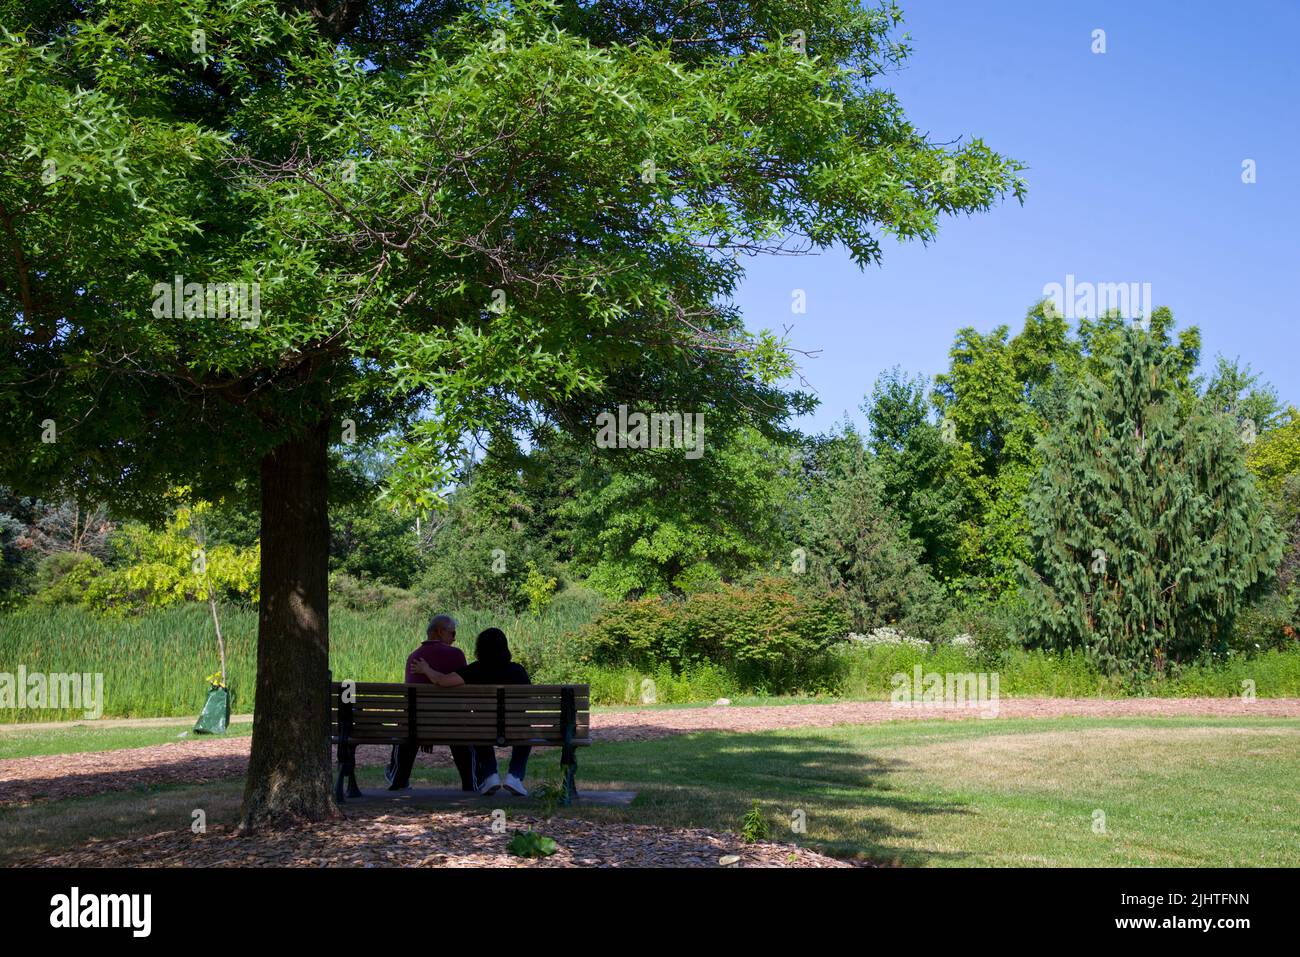 Toronto, Ontario / Canada - 07/07/2022: Couple sitting on a park bench under a tree.  Relaxing in a public park in the morning Stock Photo